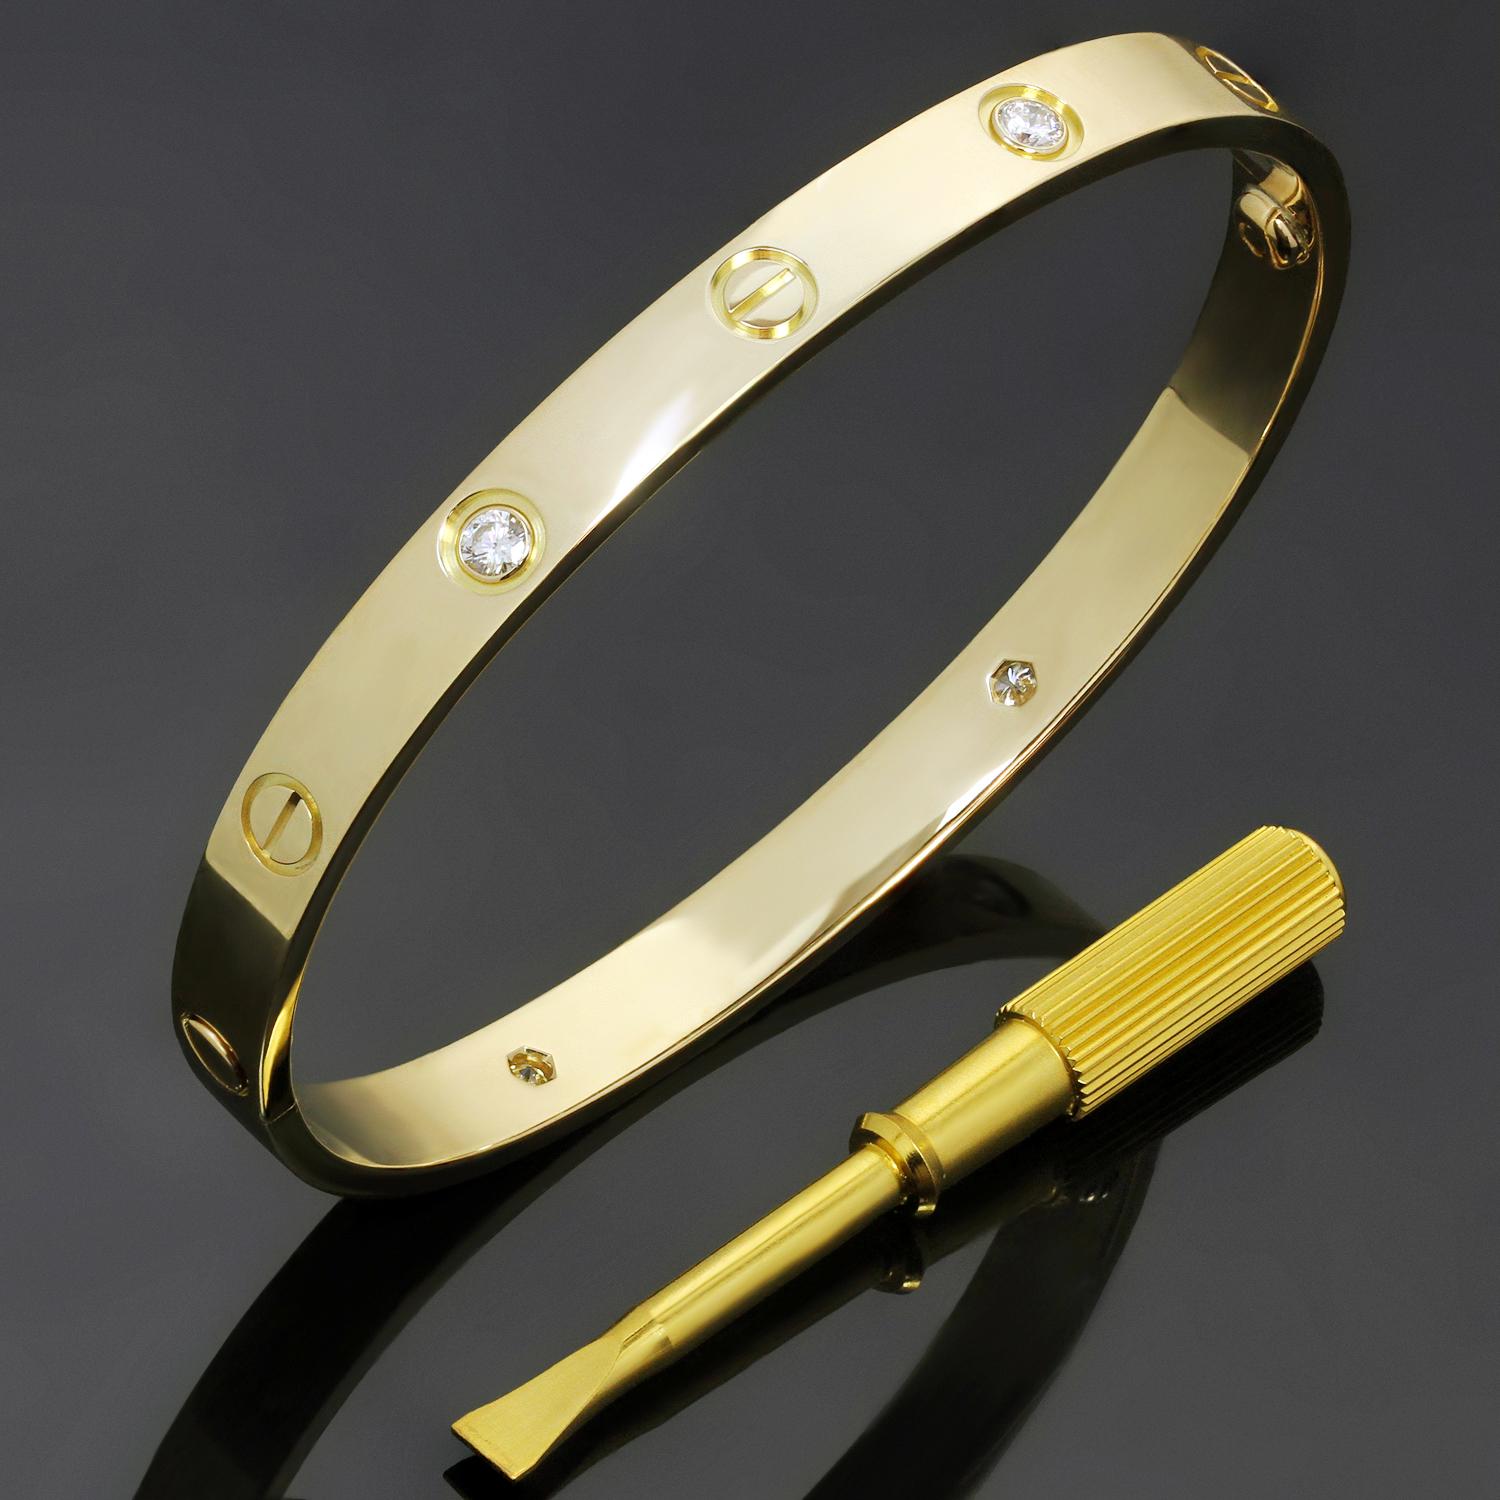 This iconic and timeless bracelet from Cartier's Love collection is crafted in 18k yellow gold and set with 4 round brilliant-cut diamonds of an estimated 0.42 carats. Completed with the original Cartier screwdriver, pouch and service receipt. This